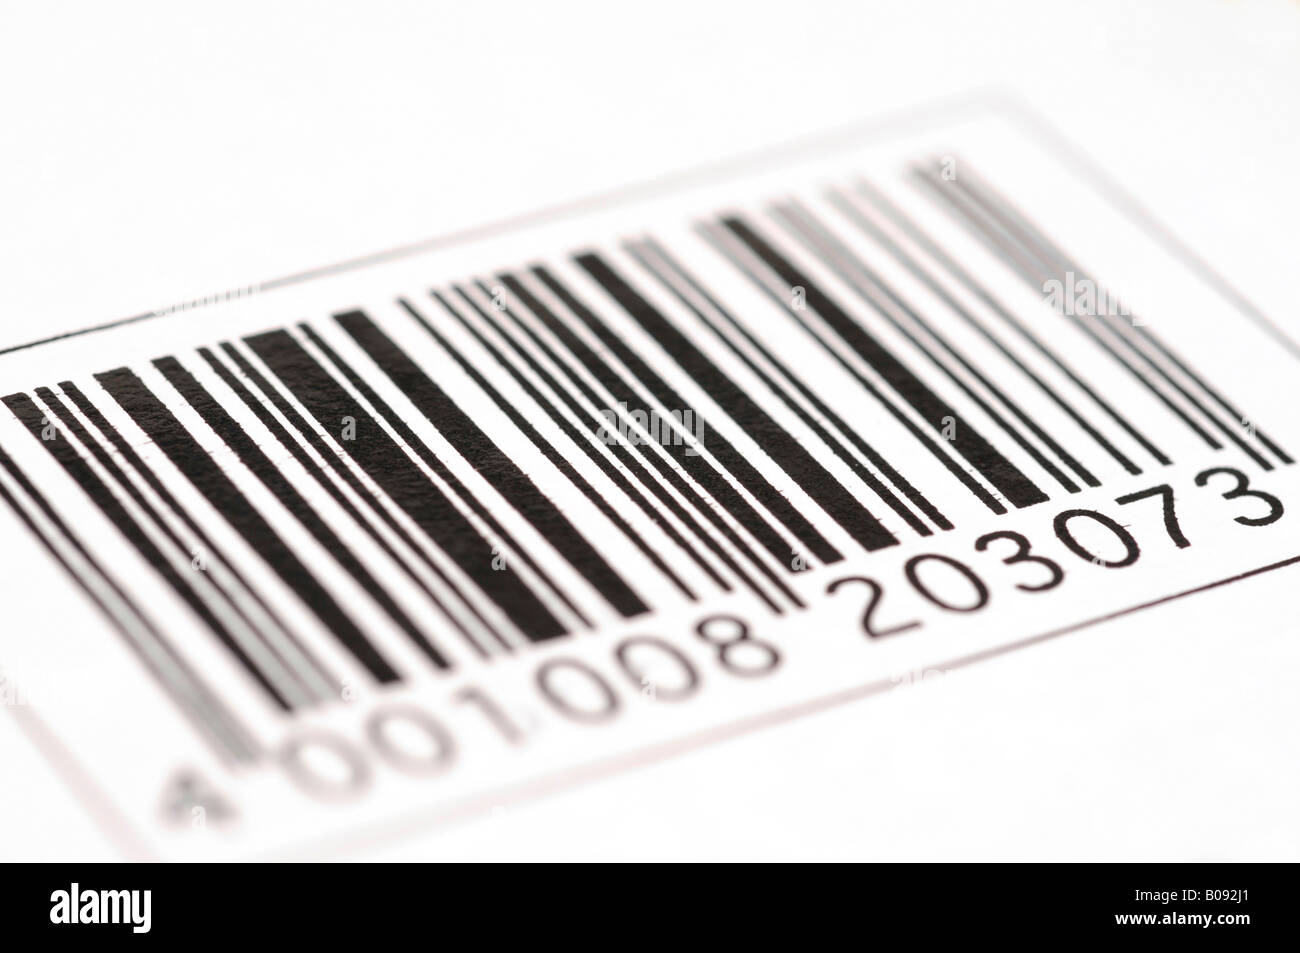 Bar code label on packaging Stock Photo